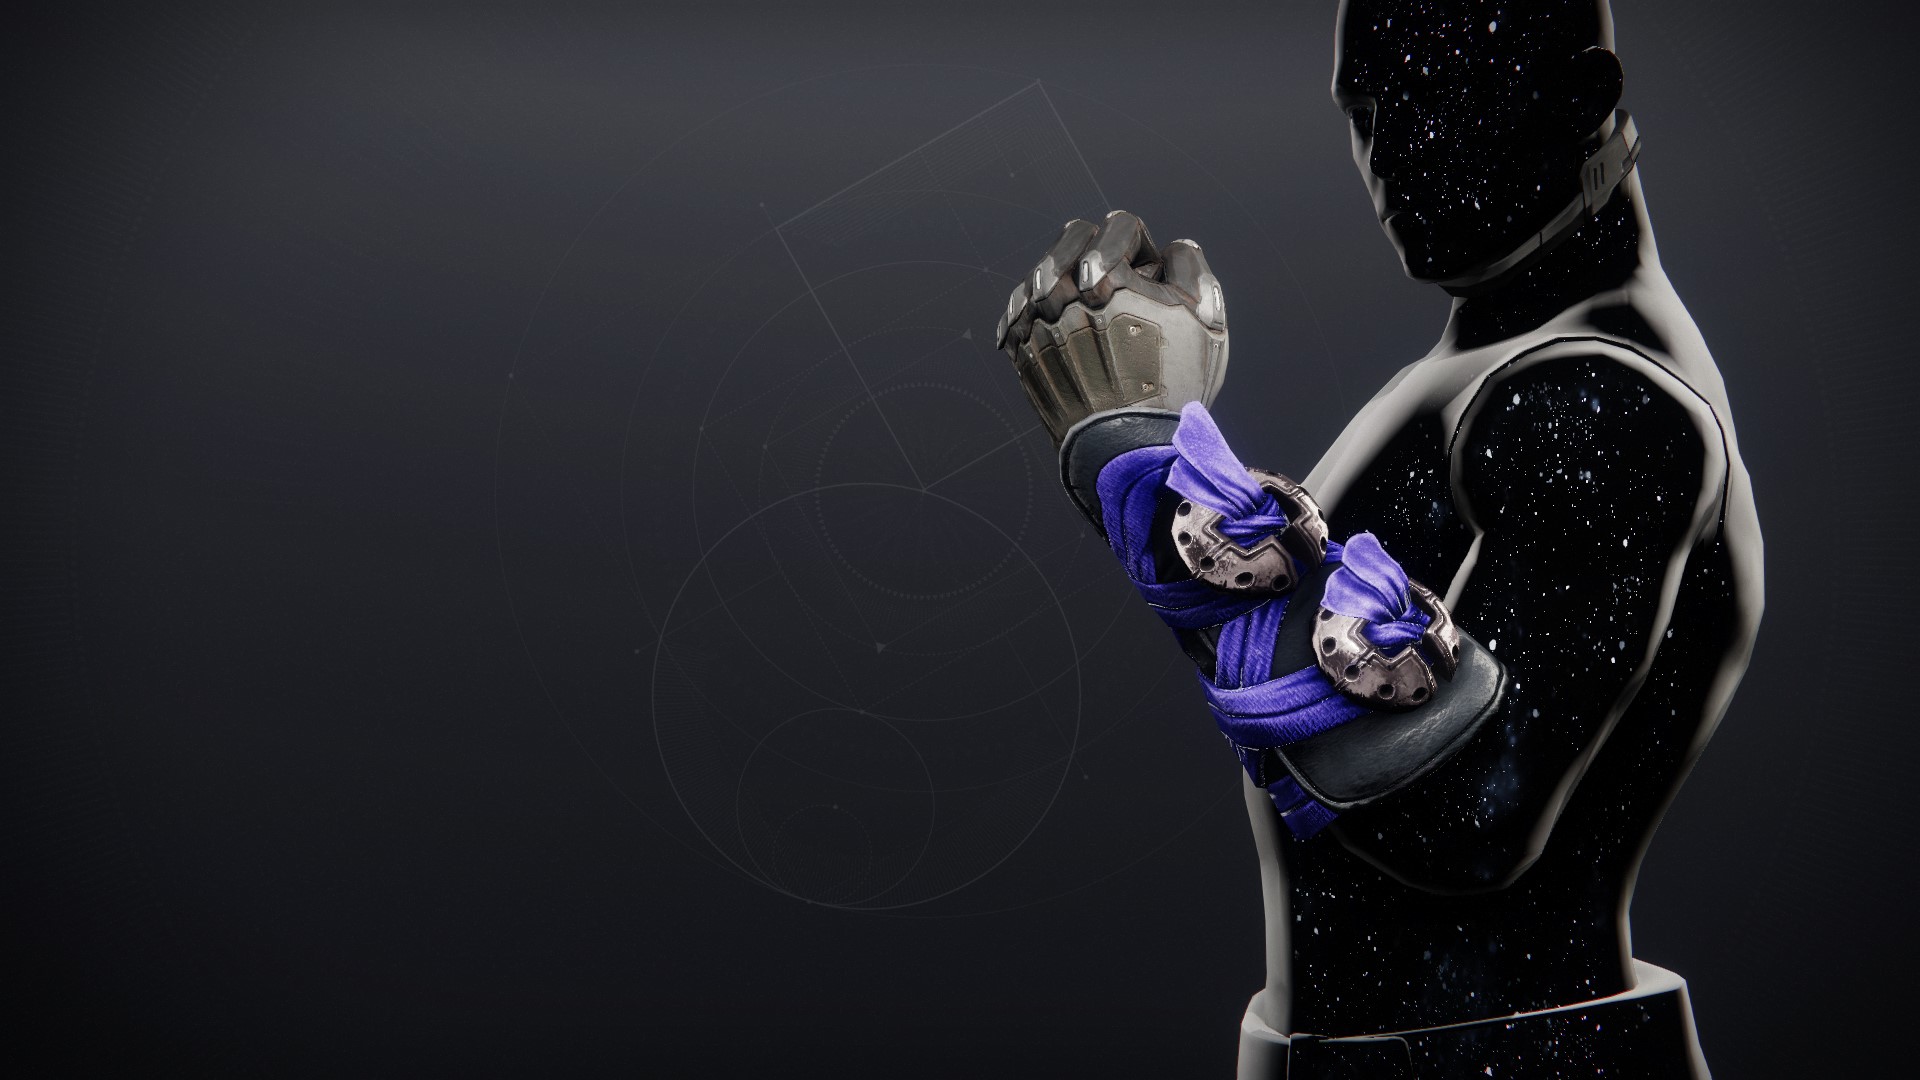 An in-game render of the Wyrmguard Gloves.